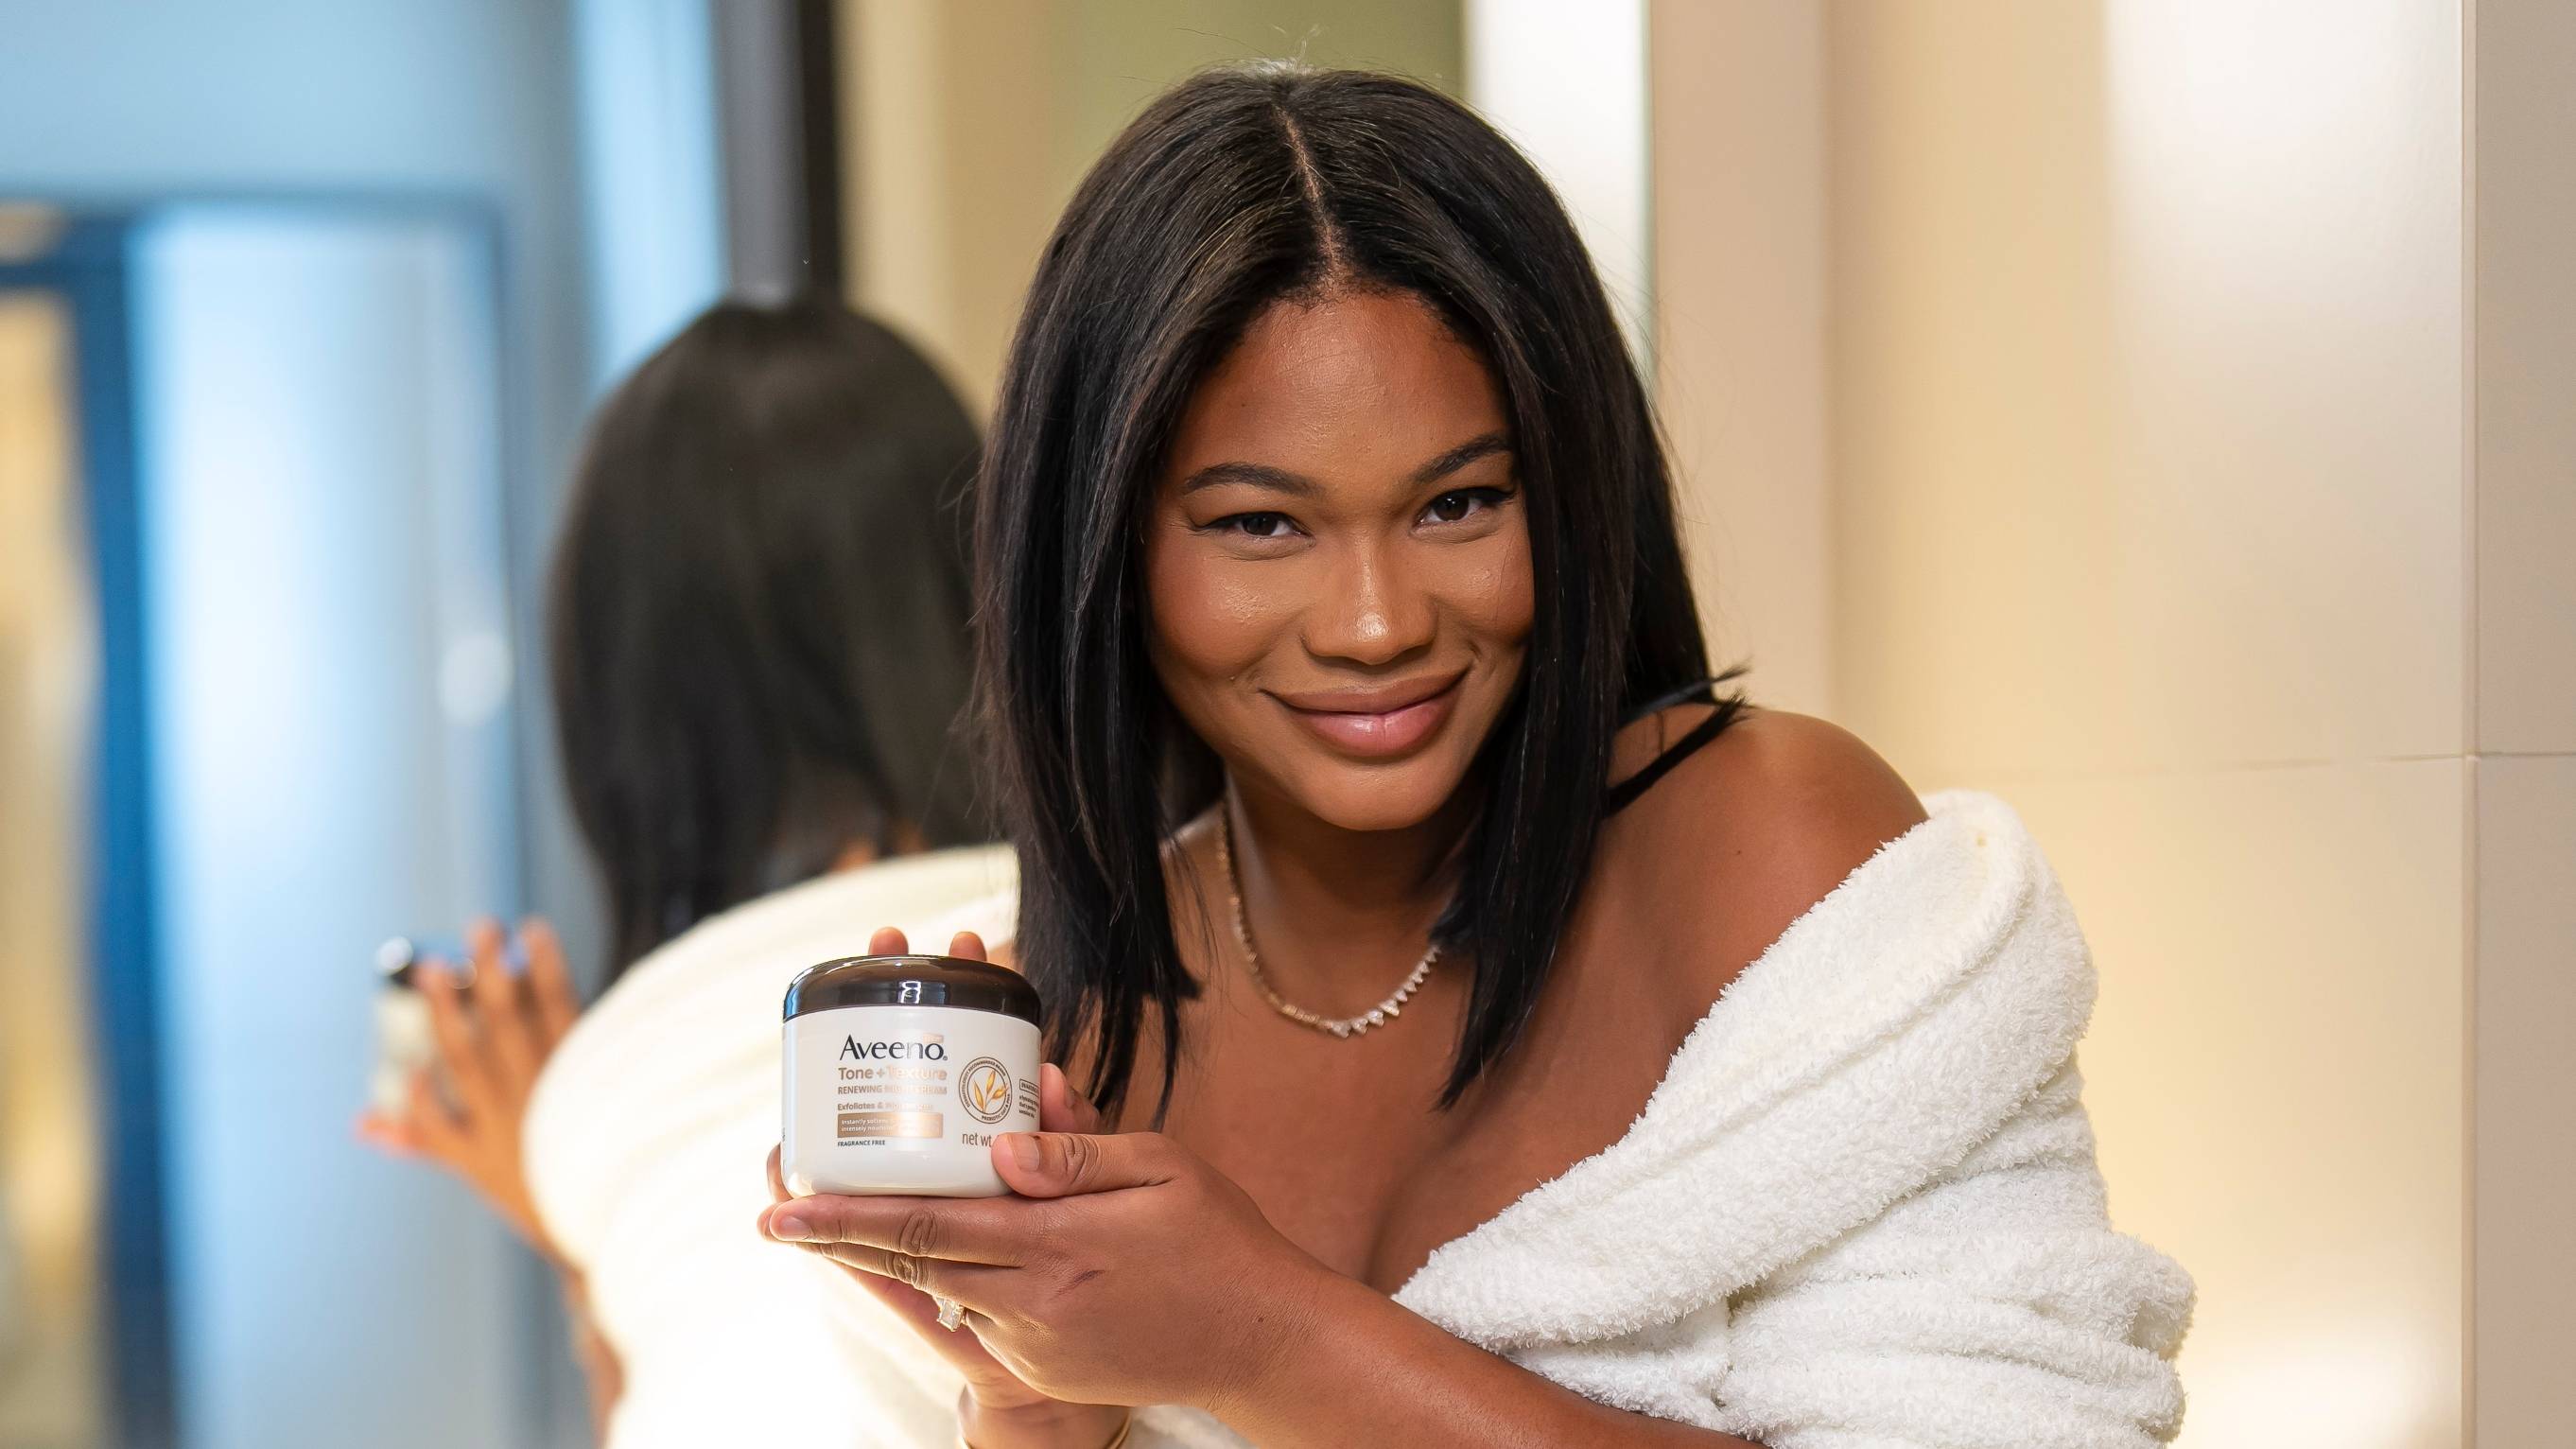 Chanel Iman on Skin Health for Black Women with Aveeno and Health